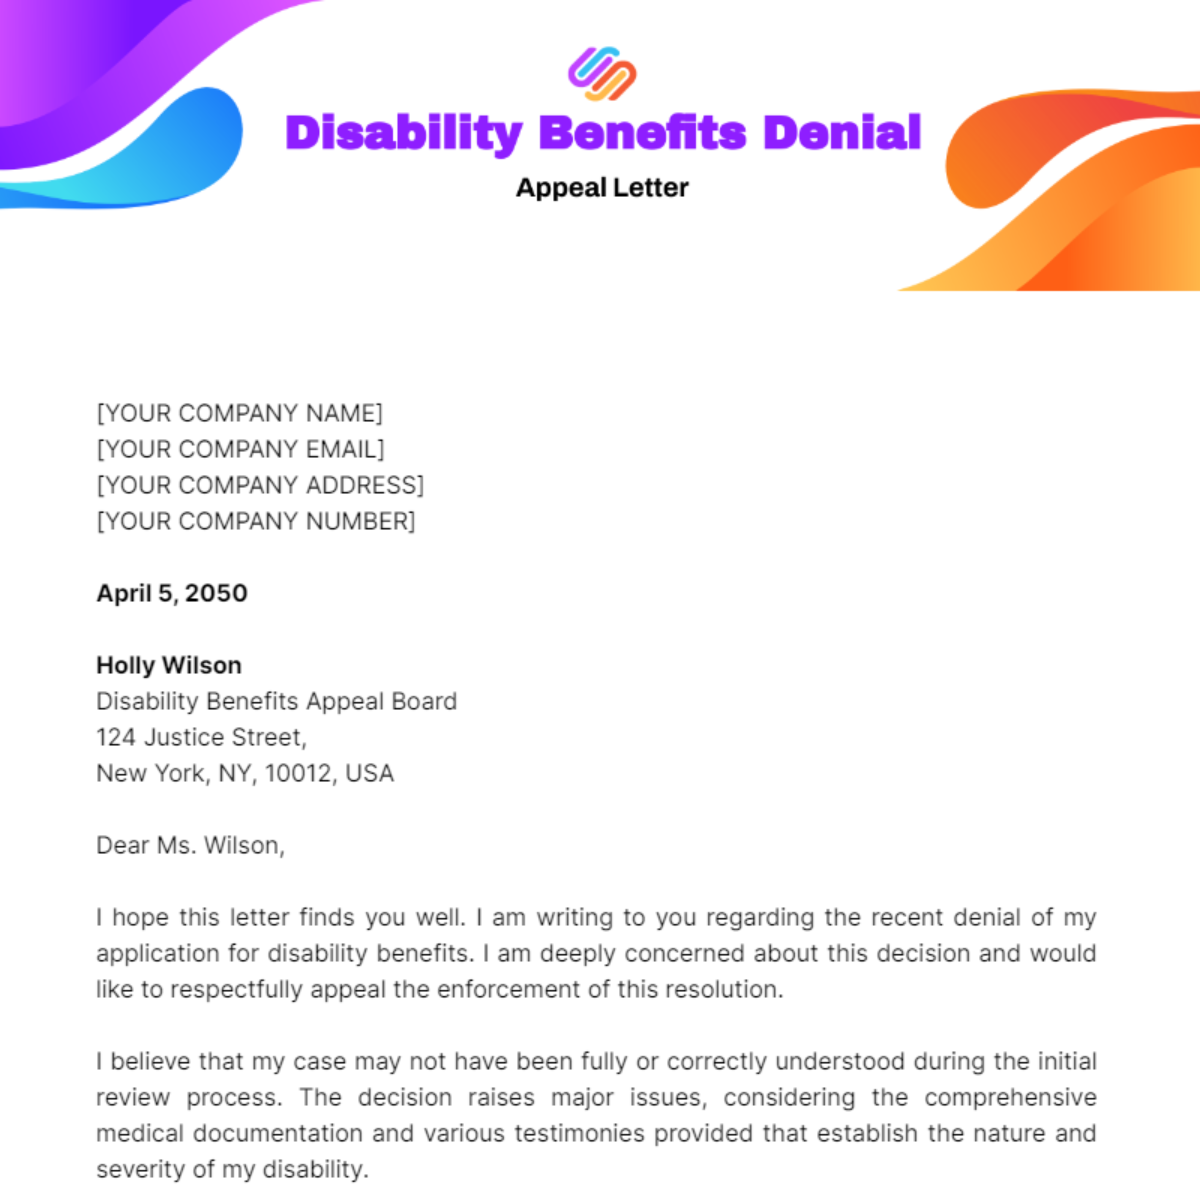 Disability Benefits Denial Appeal Letter Template